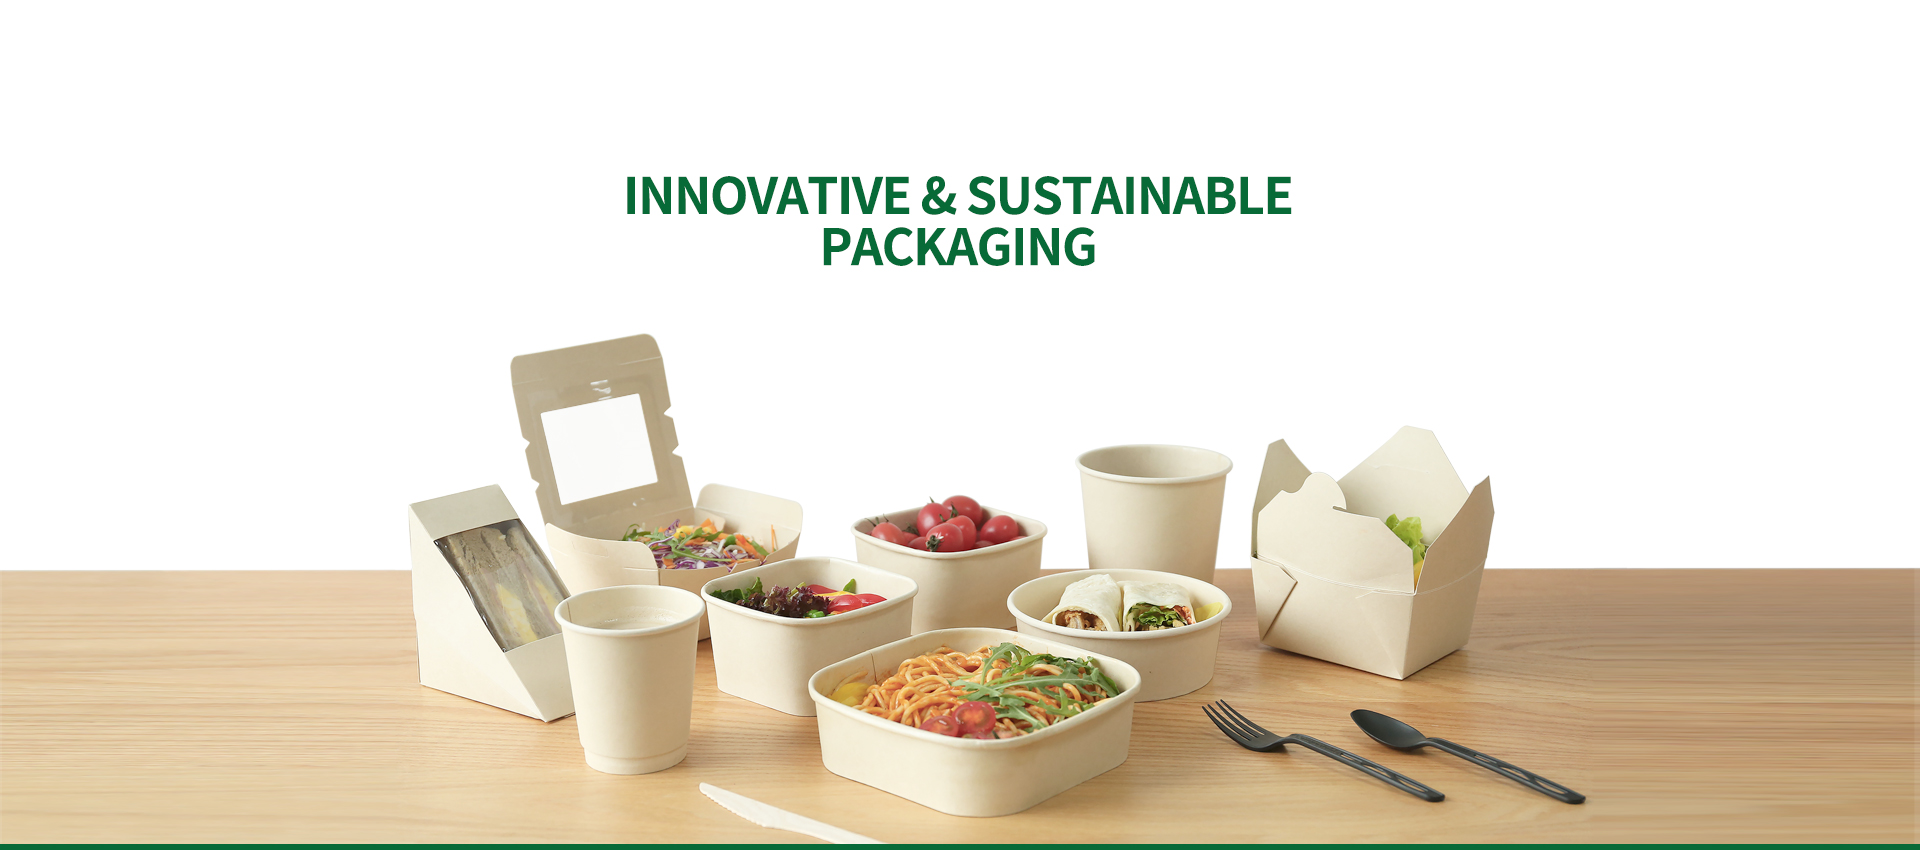 https://www.futurcompostable.com/products/